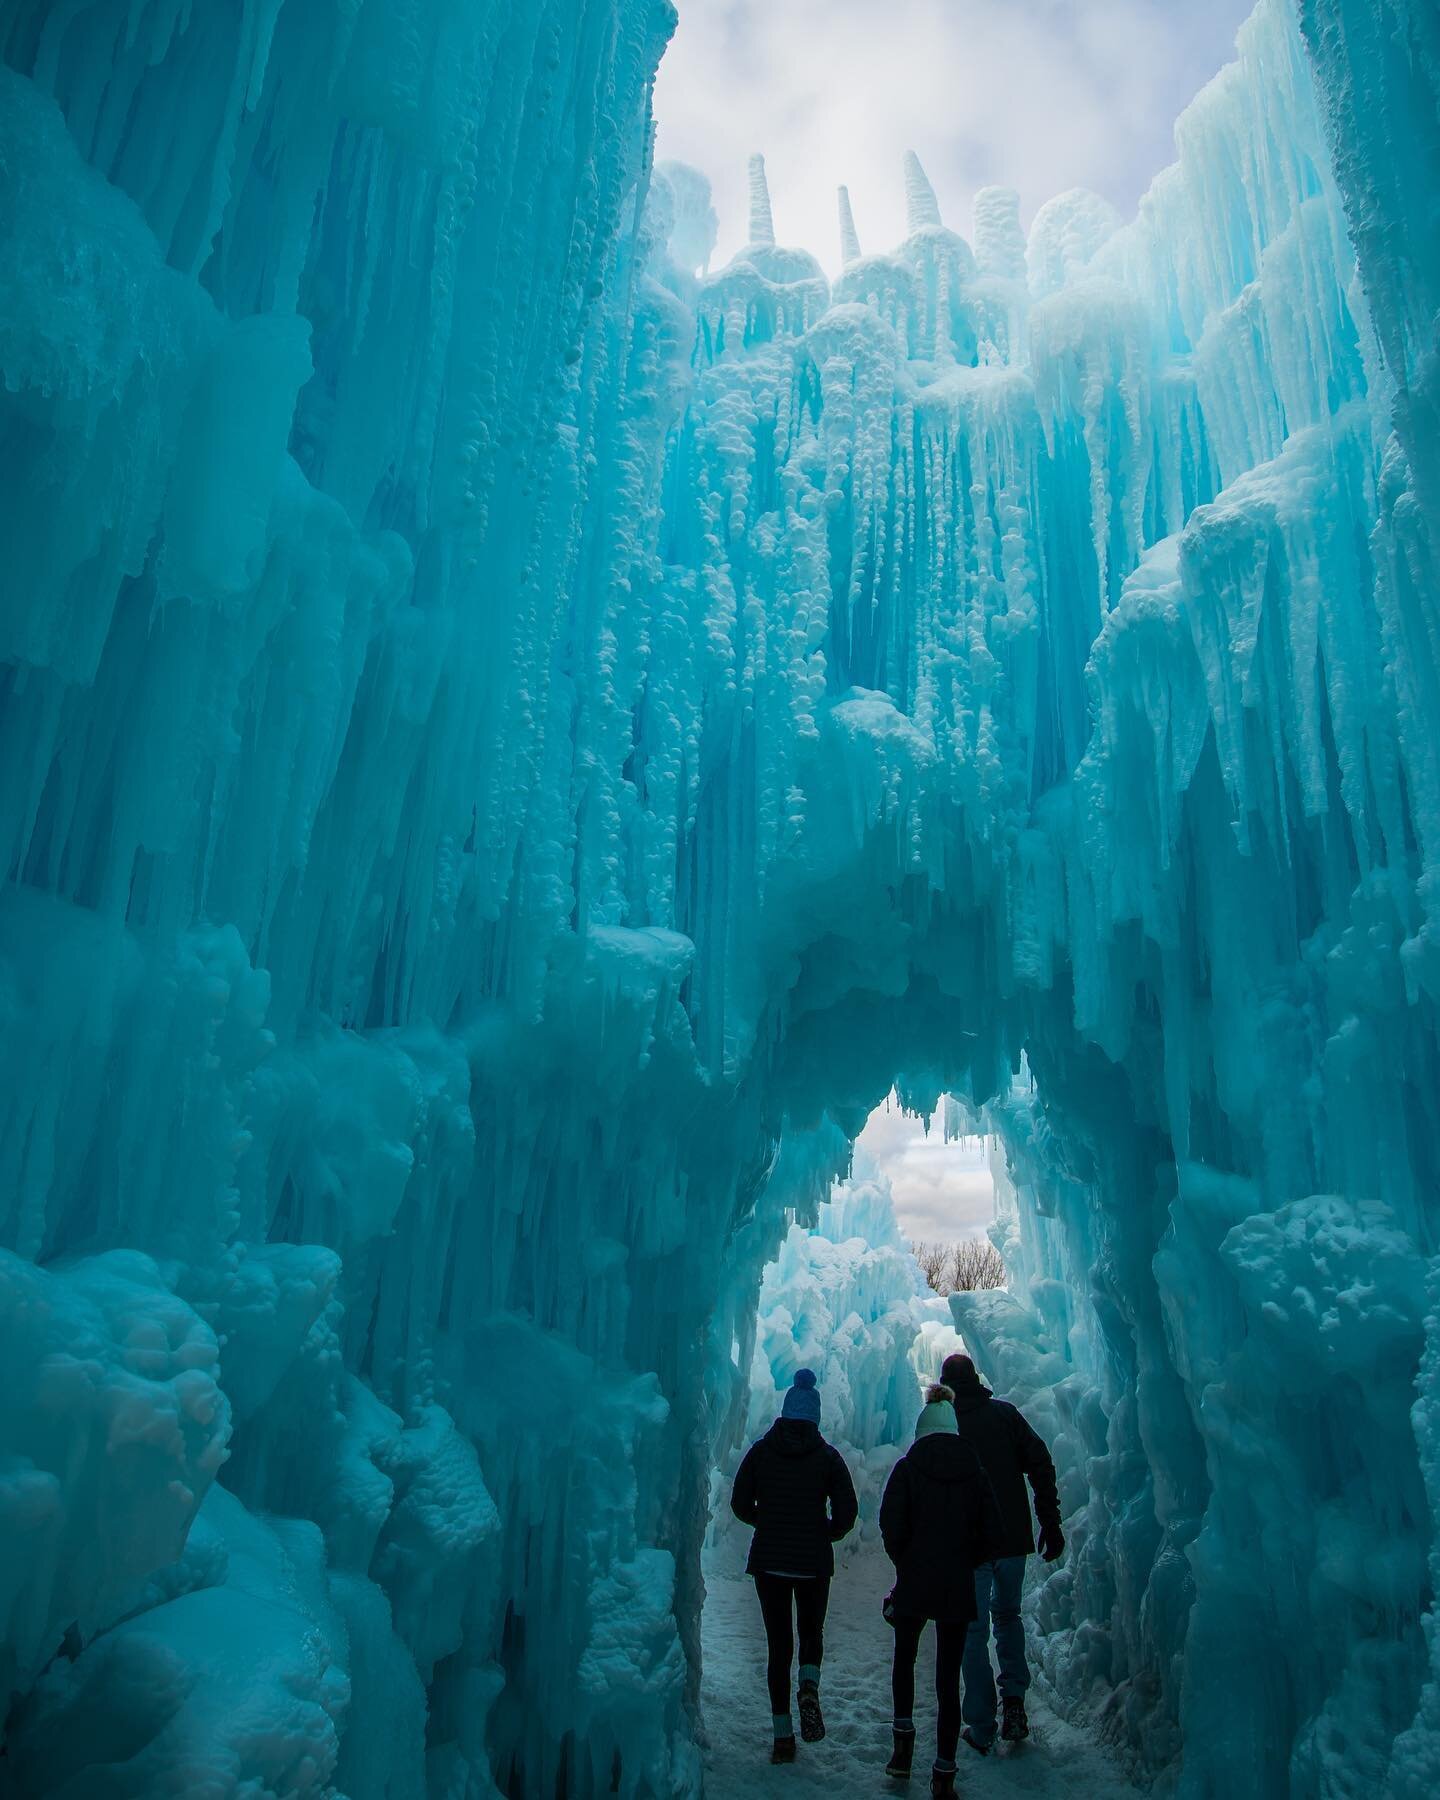 It&rsquo;s just cold cold cold&hellip;.cold outside! Sooooo let&rsquo;s go see an ice castle! Says not me but a lot of Minnesotans &hellip;🤦&zwj;♂️
.
.
.
#photography #yourshotphotographer #travel #travelphotography #minneapolis #captureminnesota #i